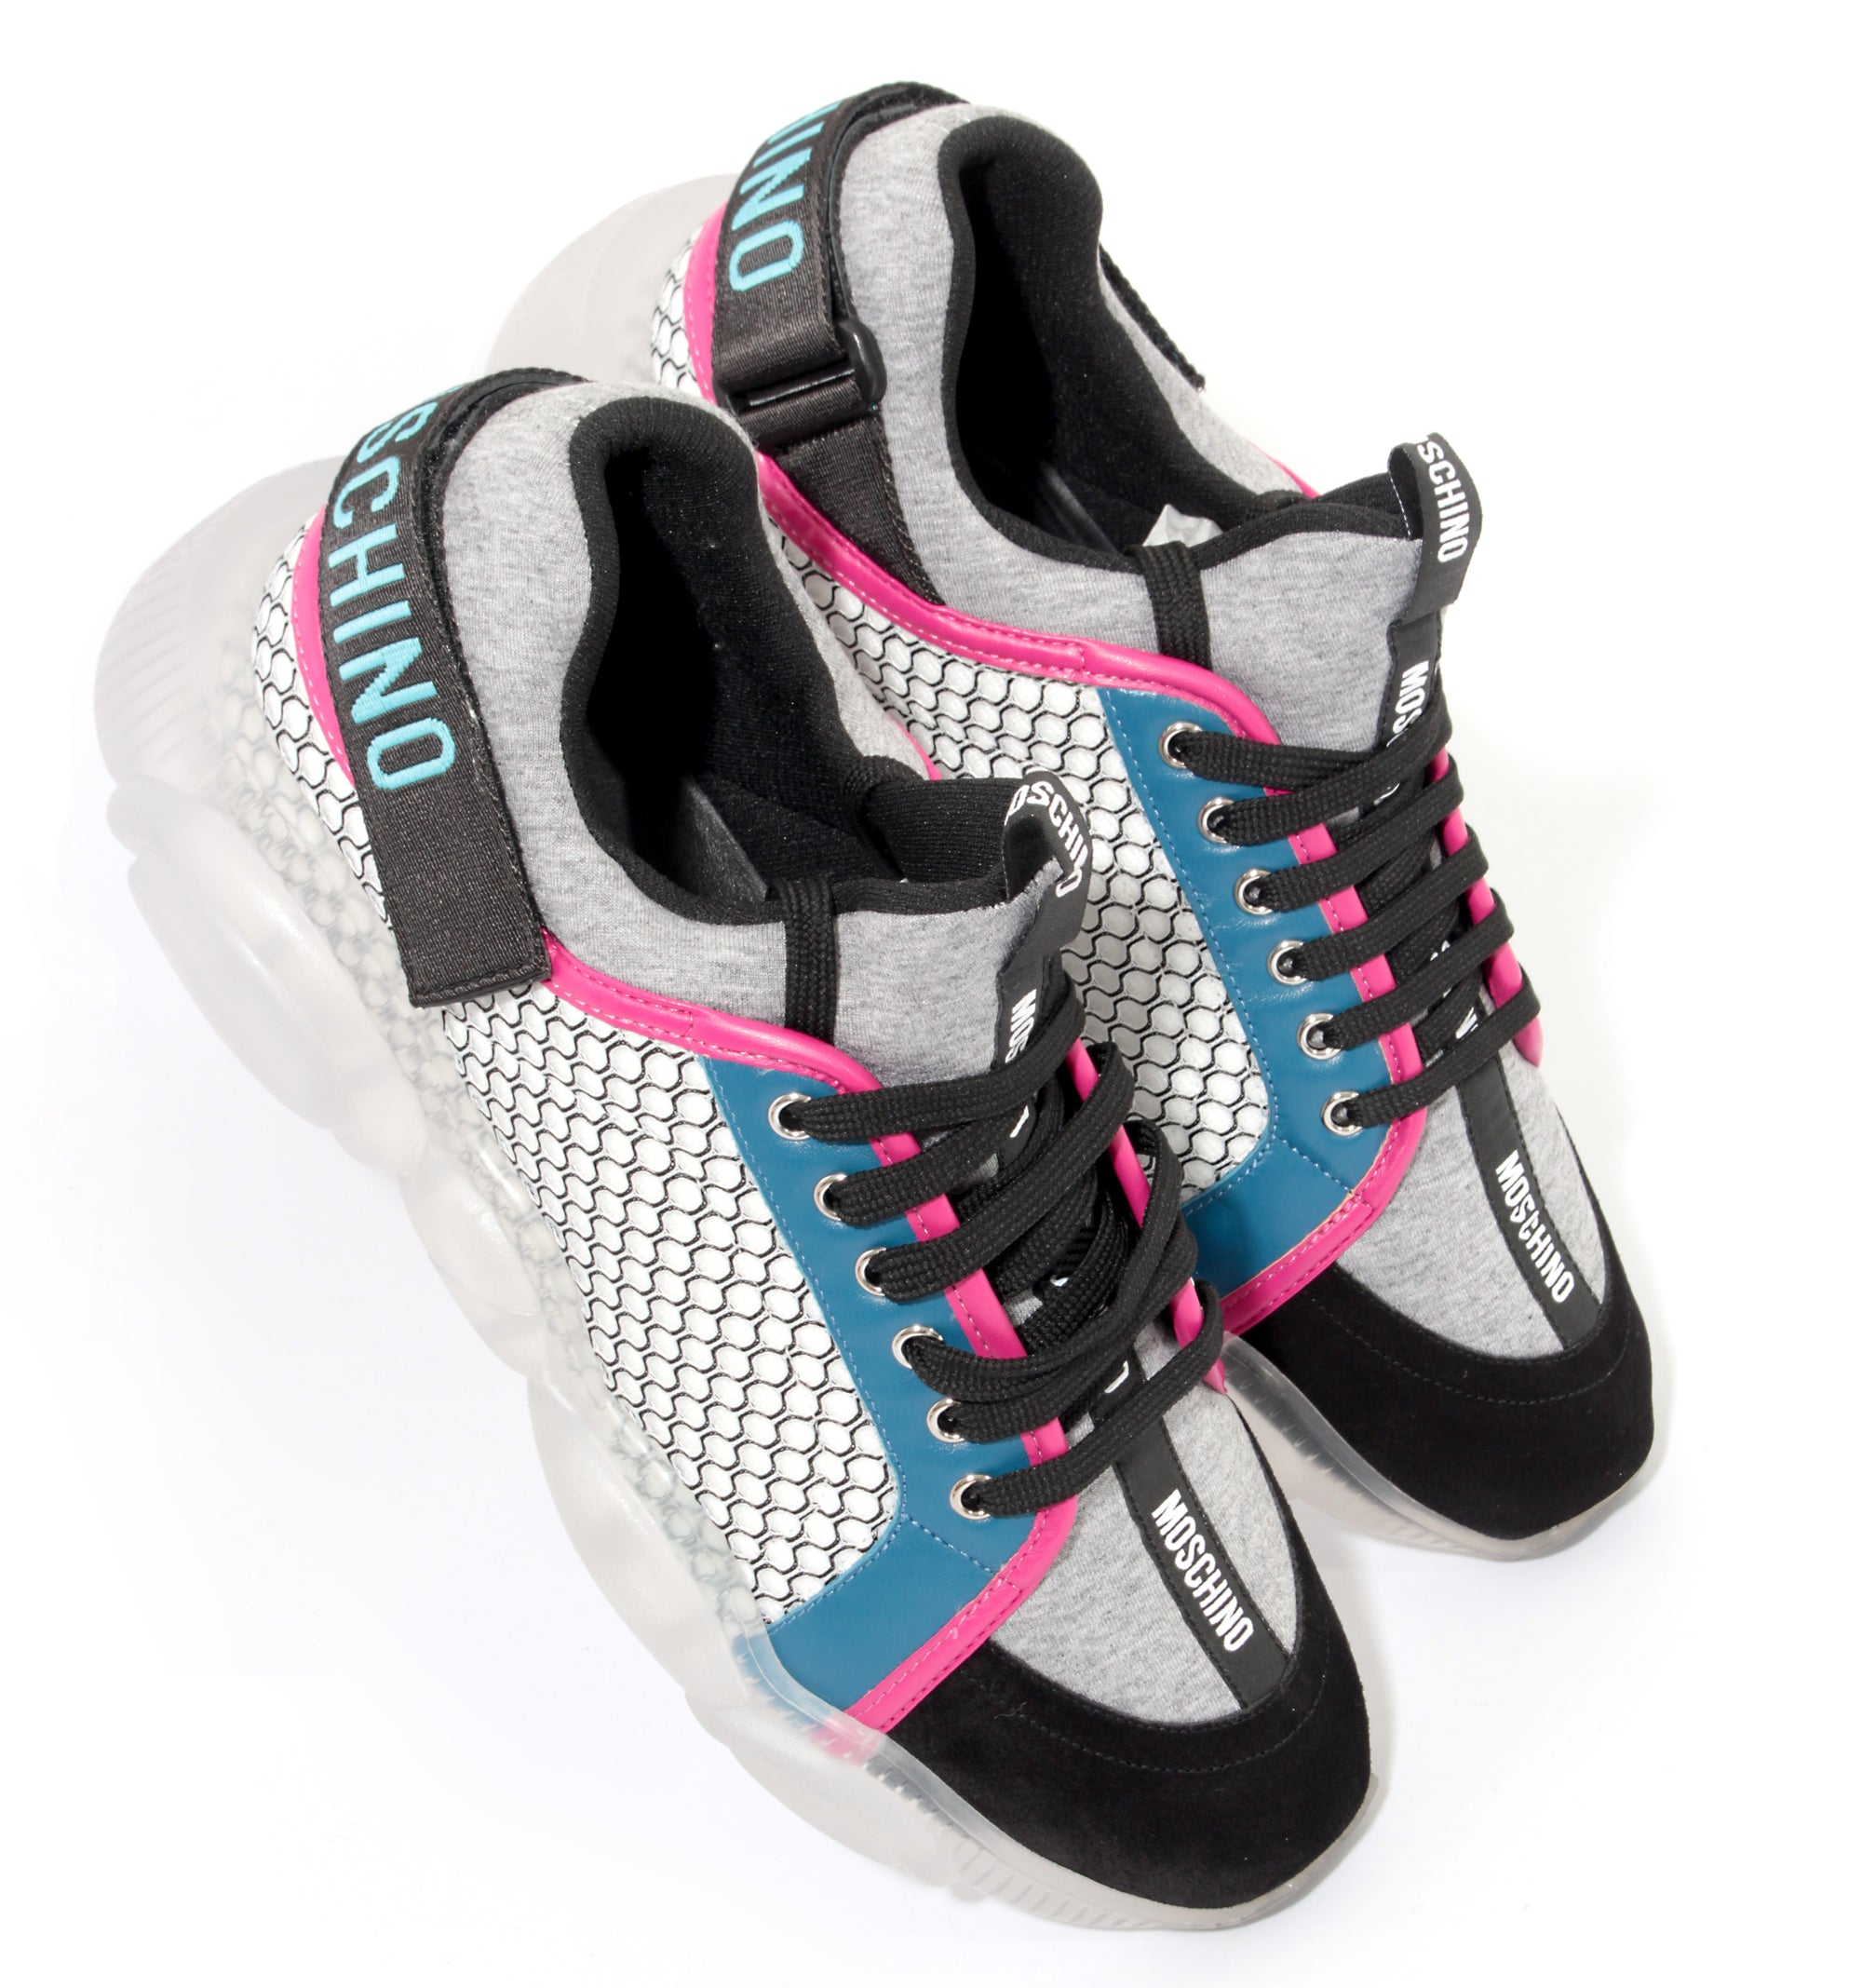 Moschino Sneakers - Grey Pink & Blue